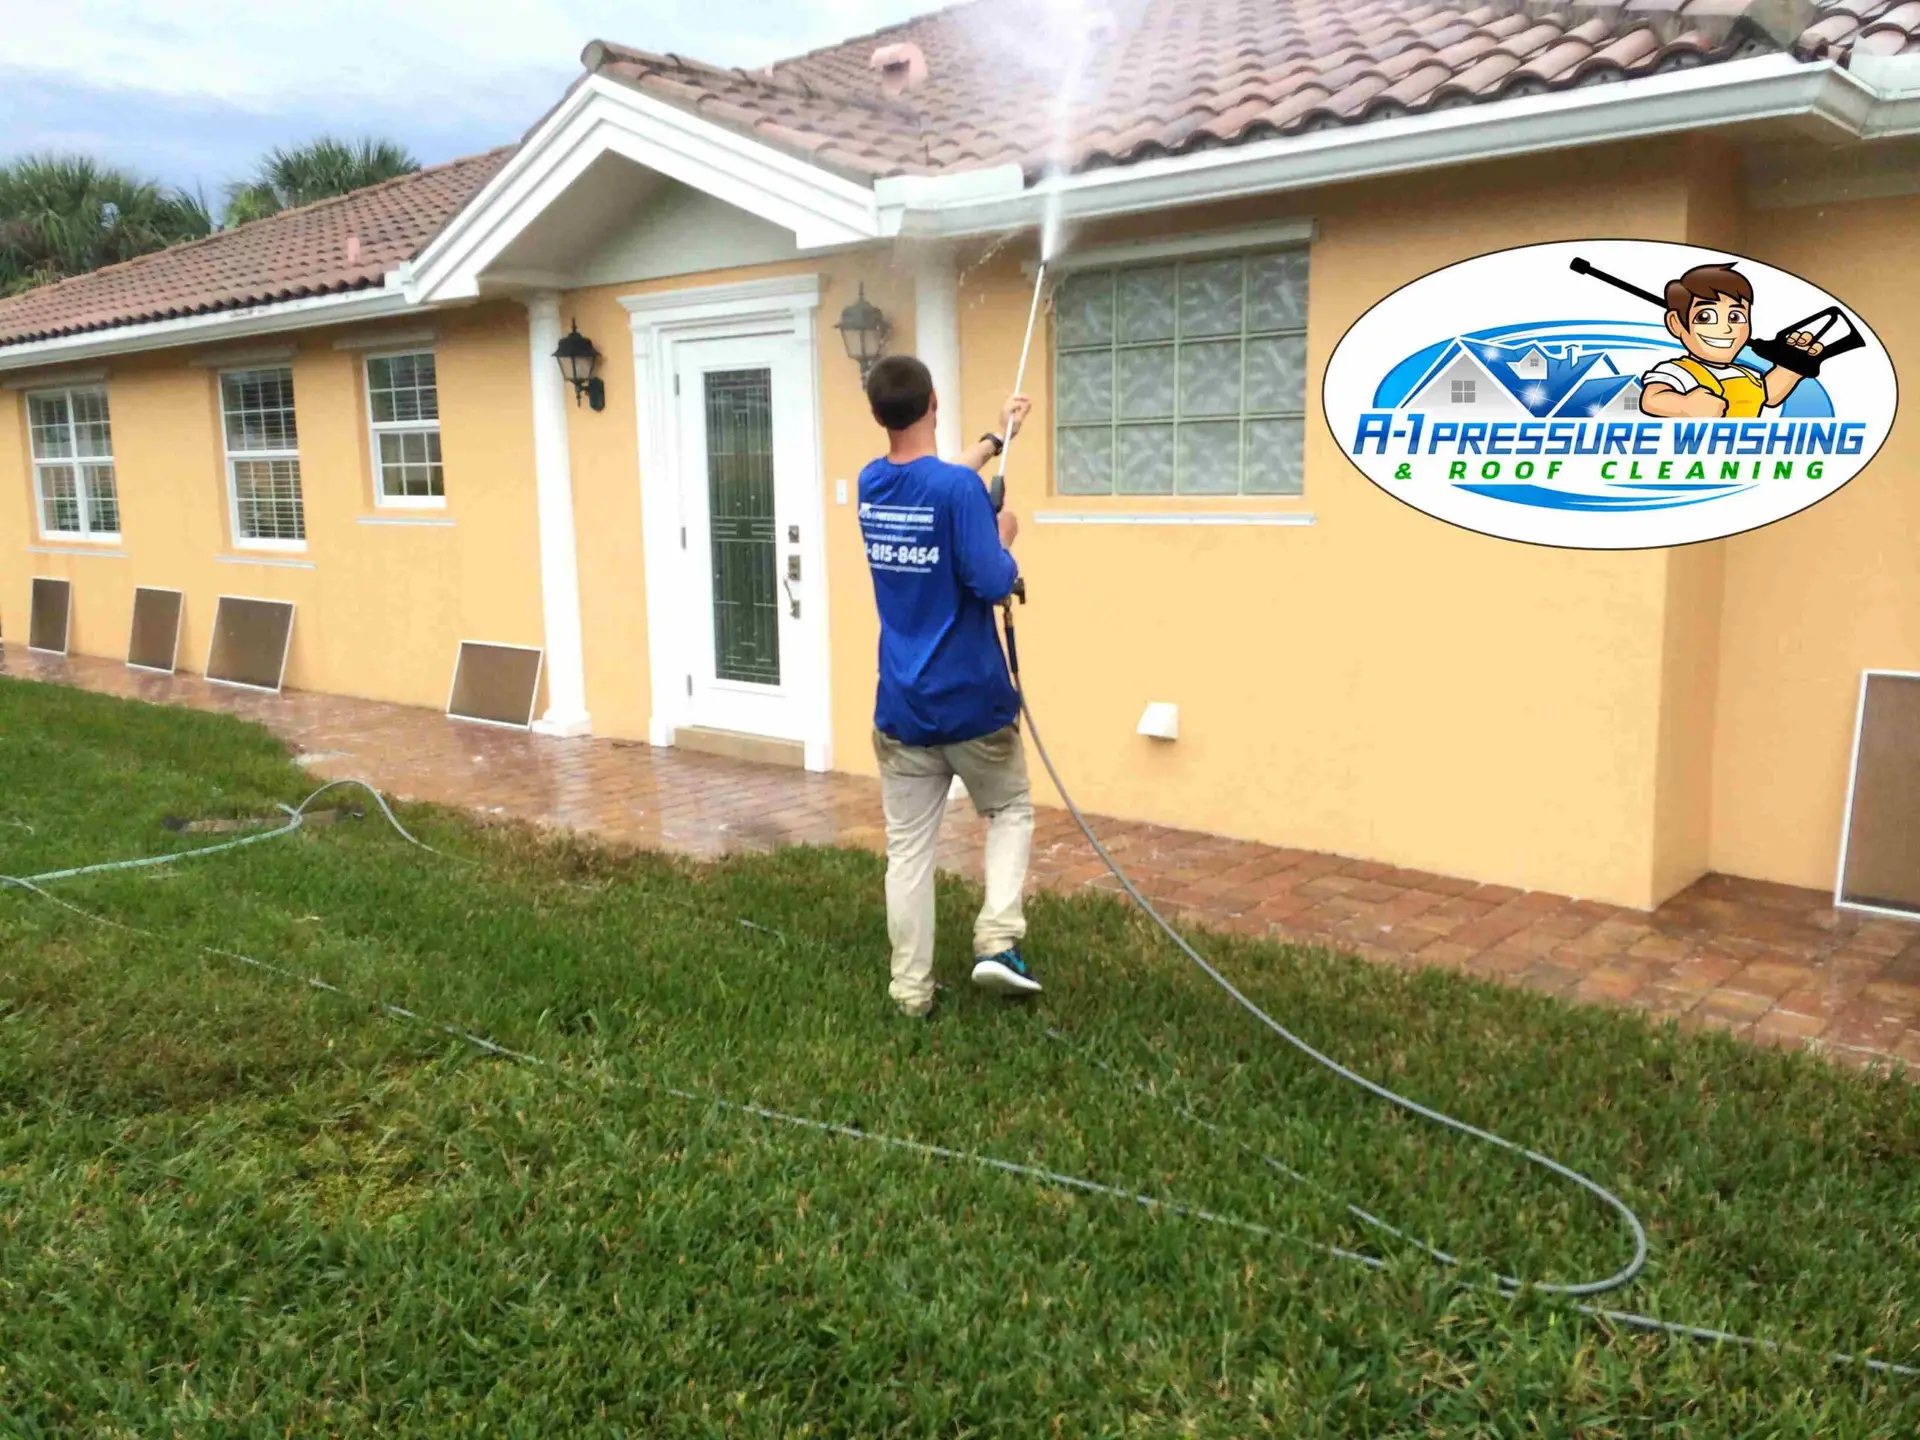 Soft Washing & House Washing | A-1 Pressure Washing & Roof Cleaning